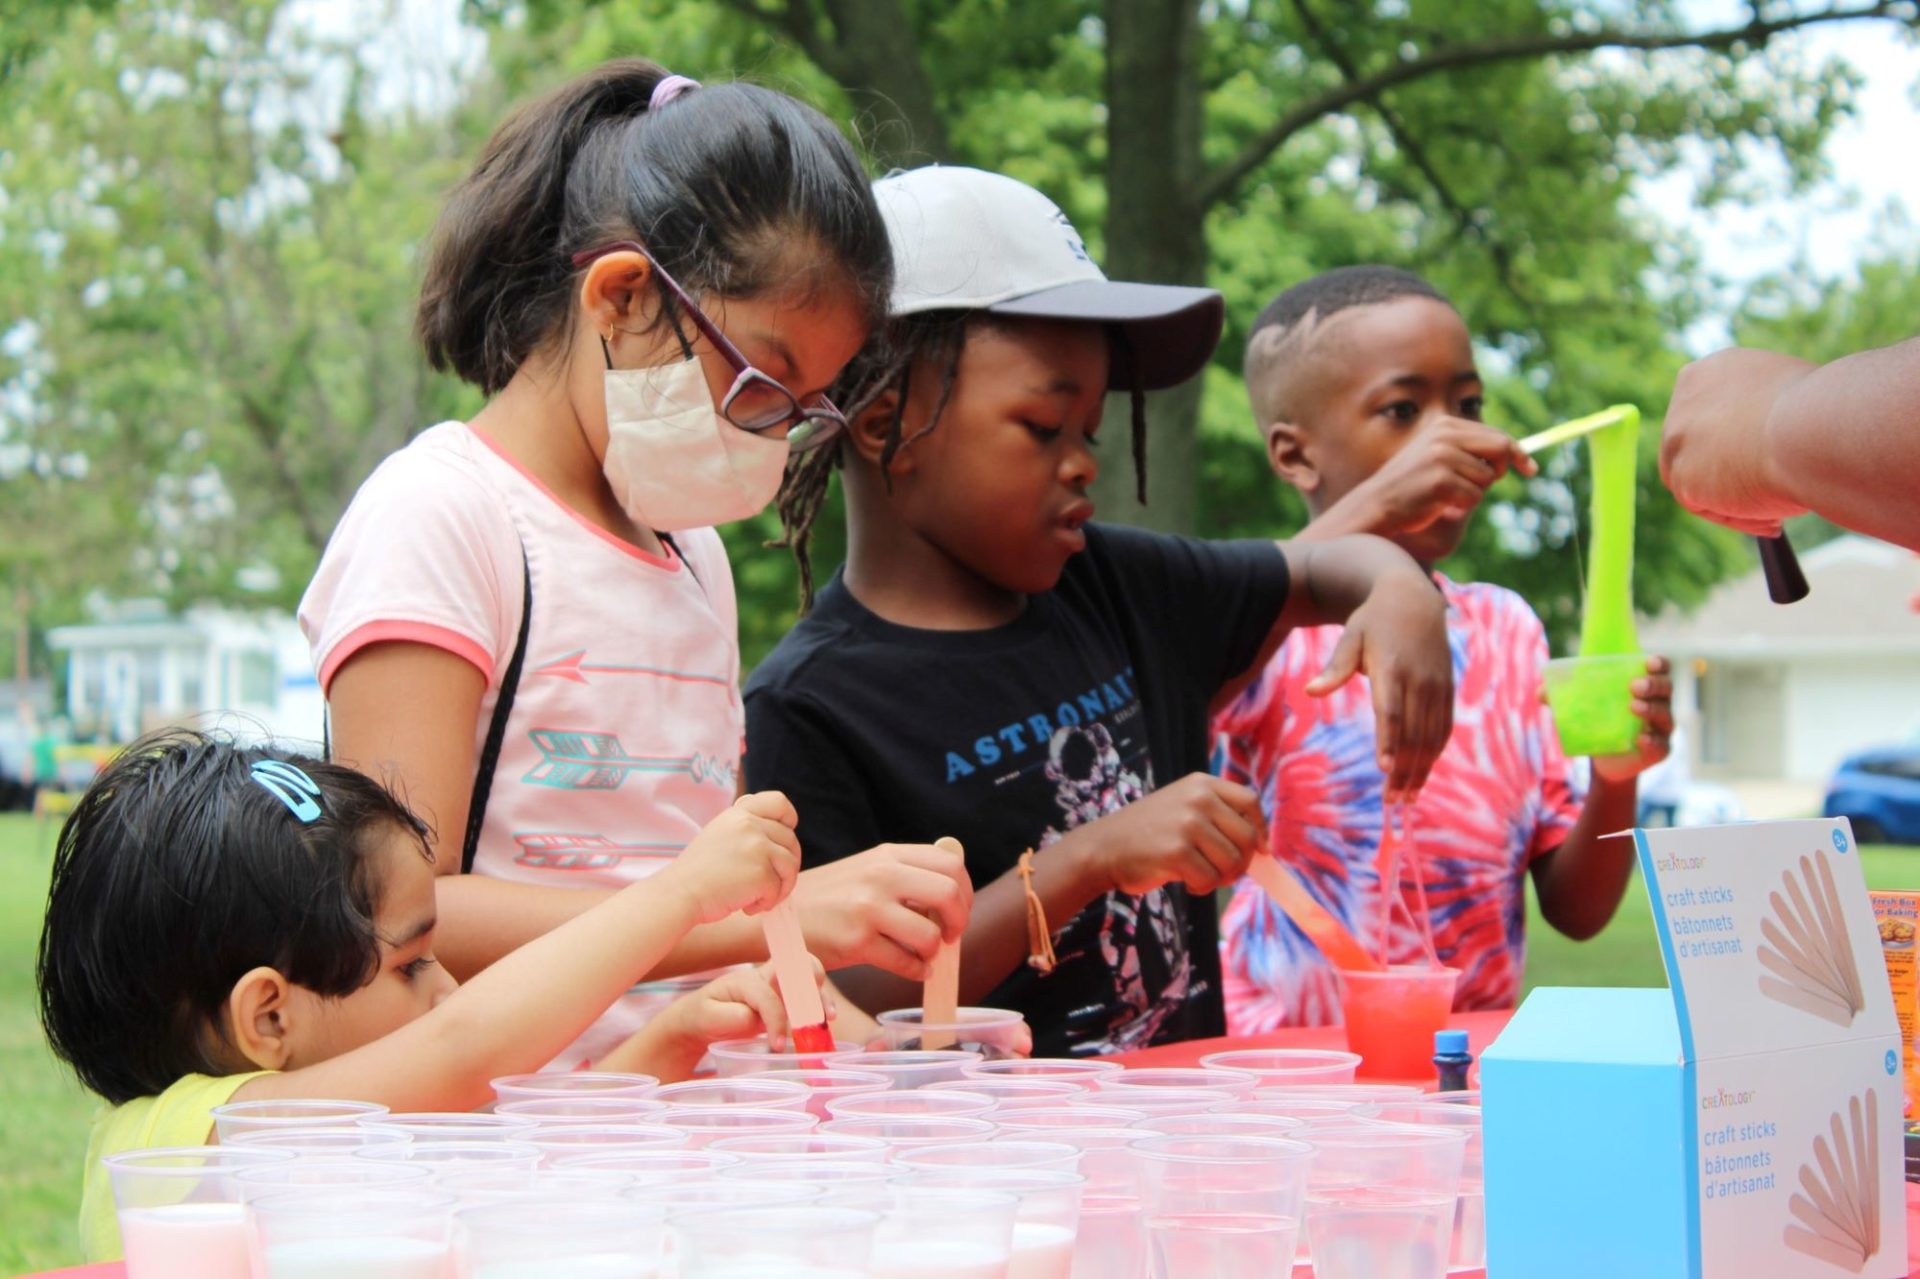 Four kids are lined up along a table with multiple empty clear containers. They are each mixing colored slime in a container.